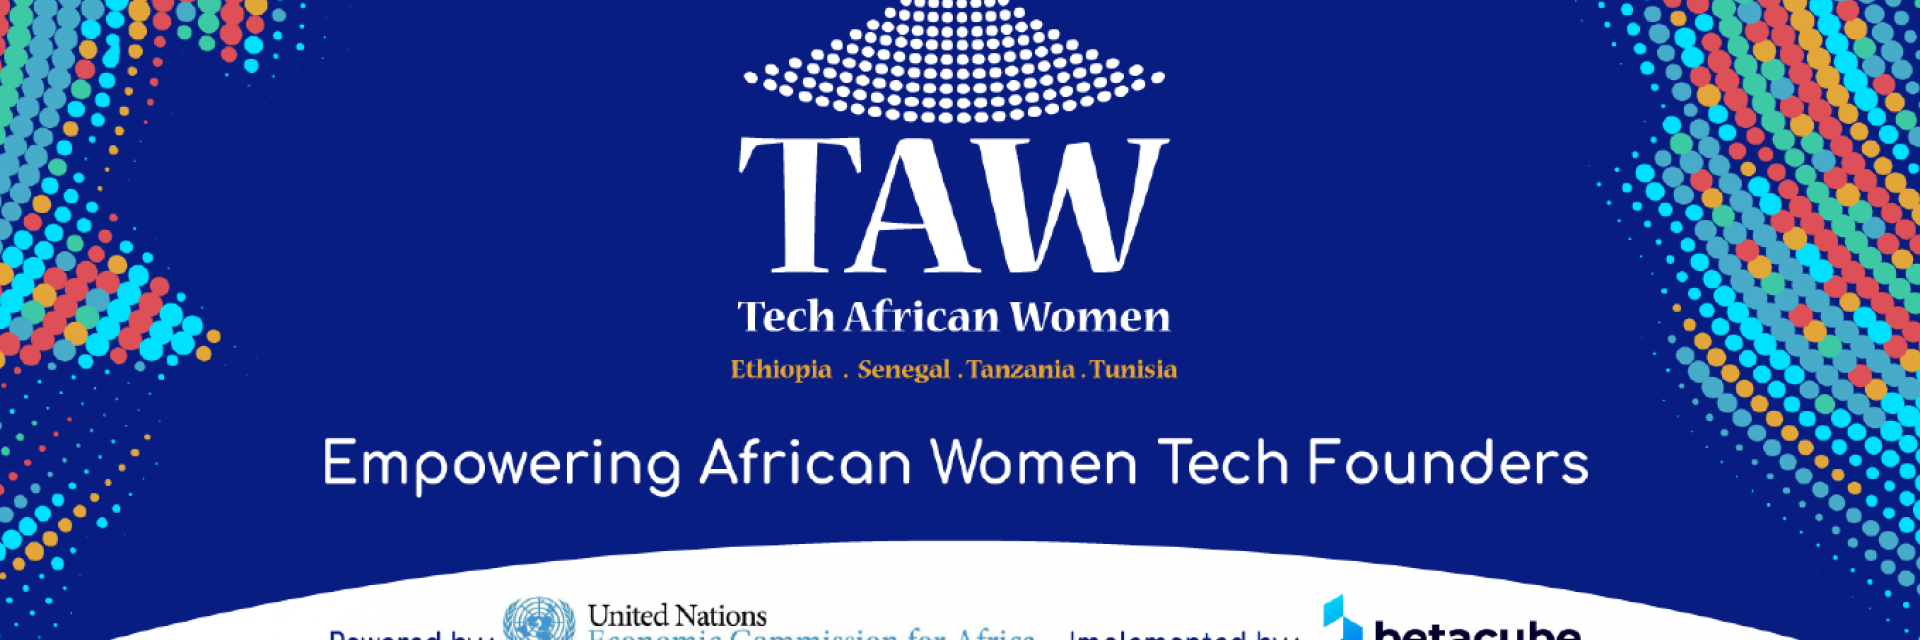 Call for Applications for Tech African Women program, by ECA in partnership with Betacube